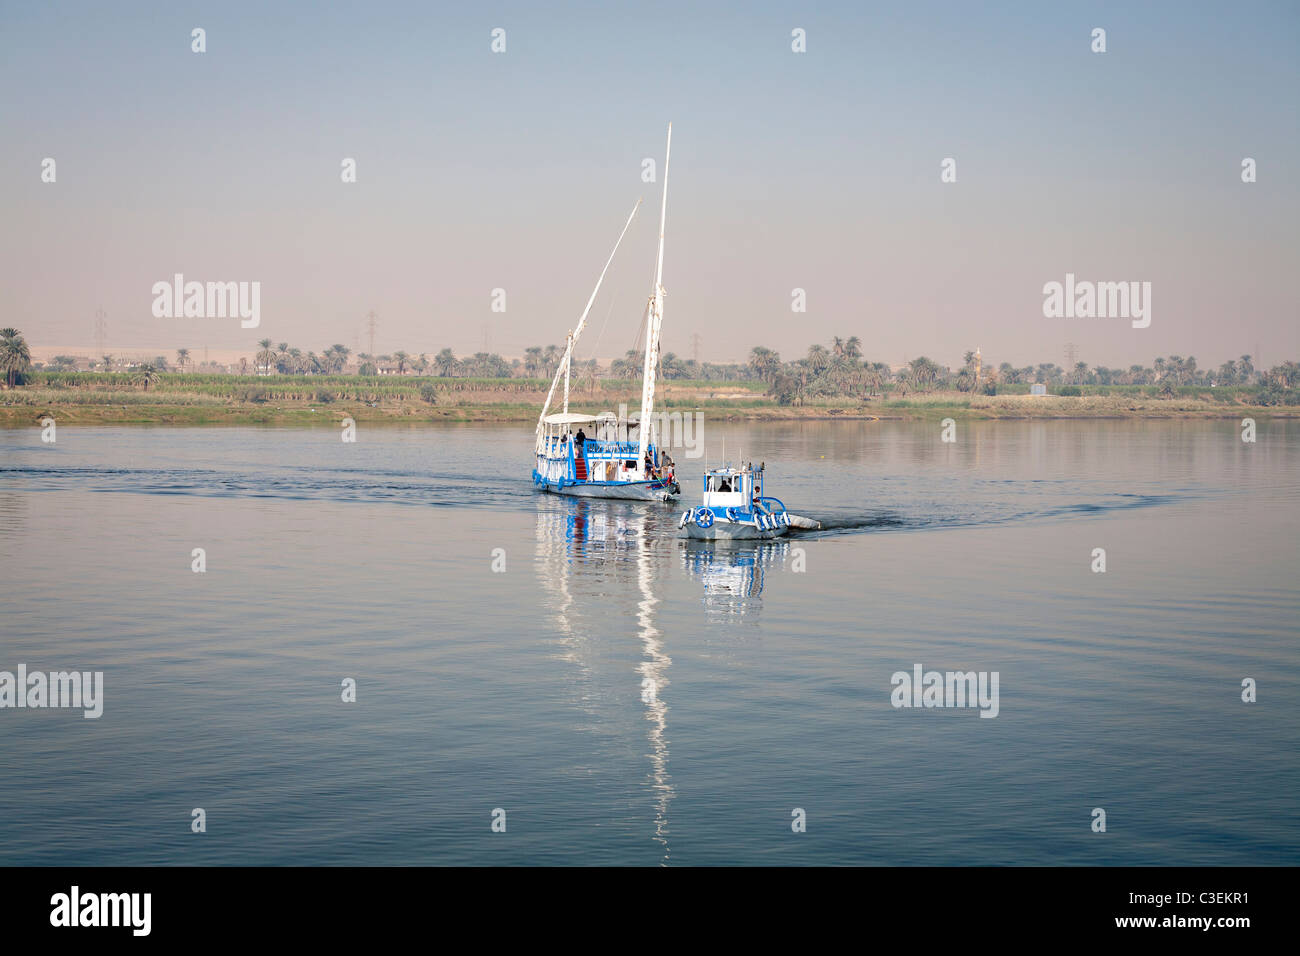 A dahabiya being towed by small craft on the river Nile in calm water, Egypt, Africa Stock Photo